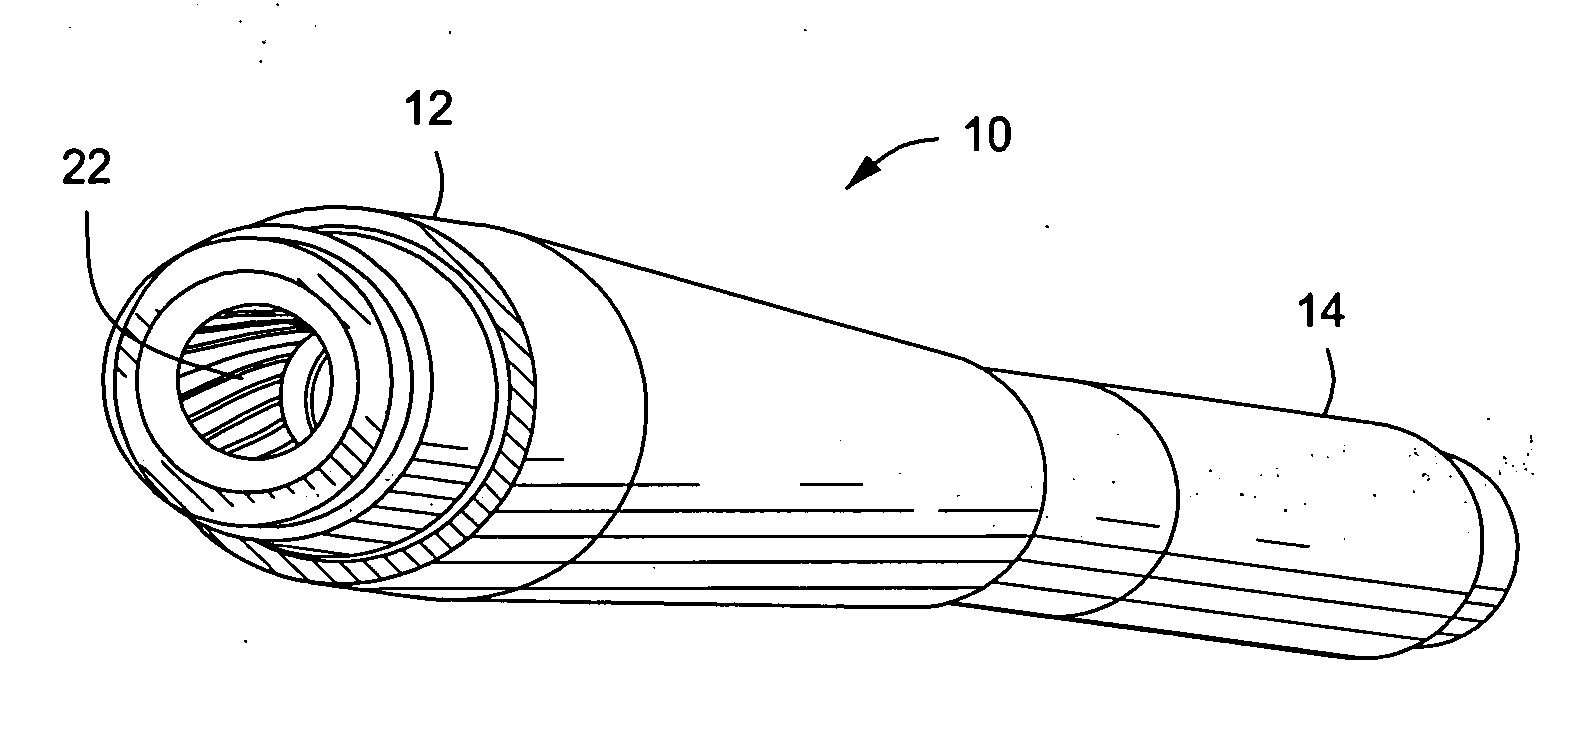 Firearm barrel having cartridge chamber preparation facilitating effiecient cartridge case extraction and protection against premature bolt failure